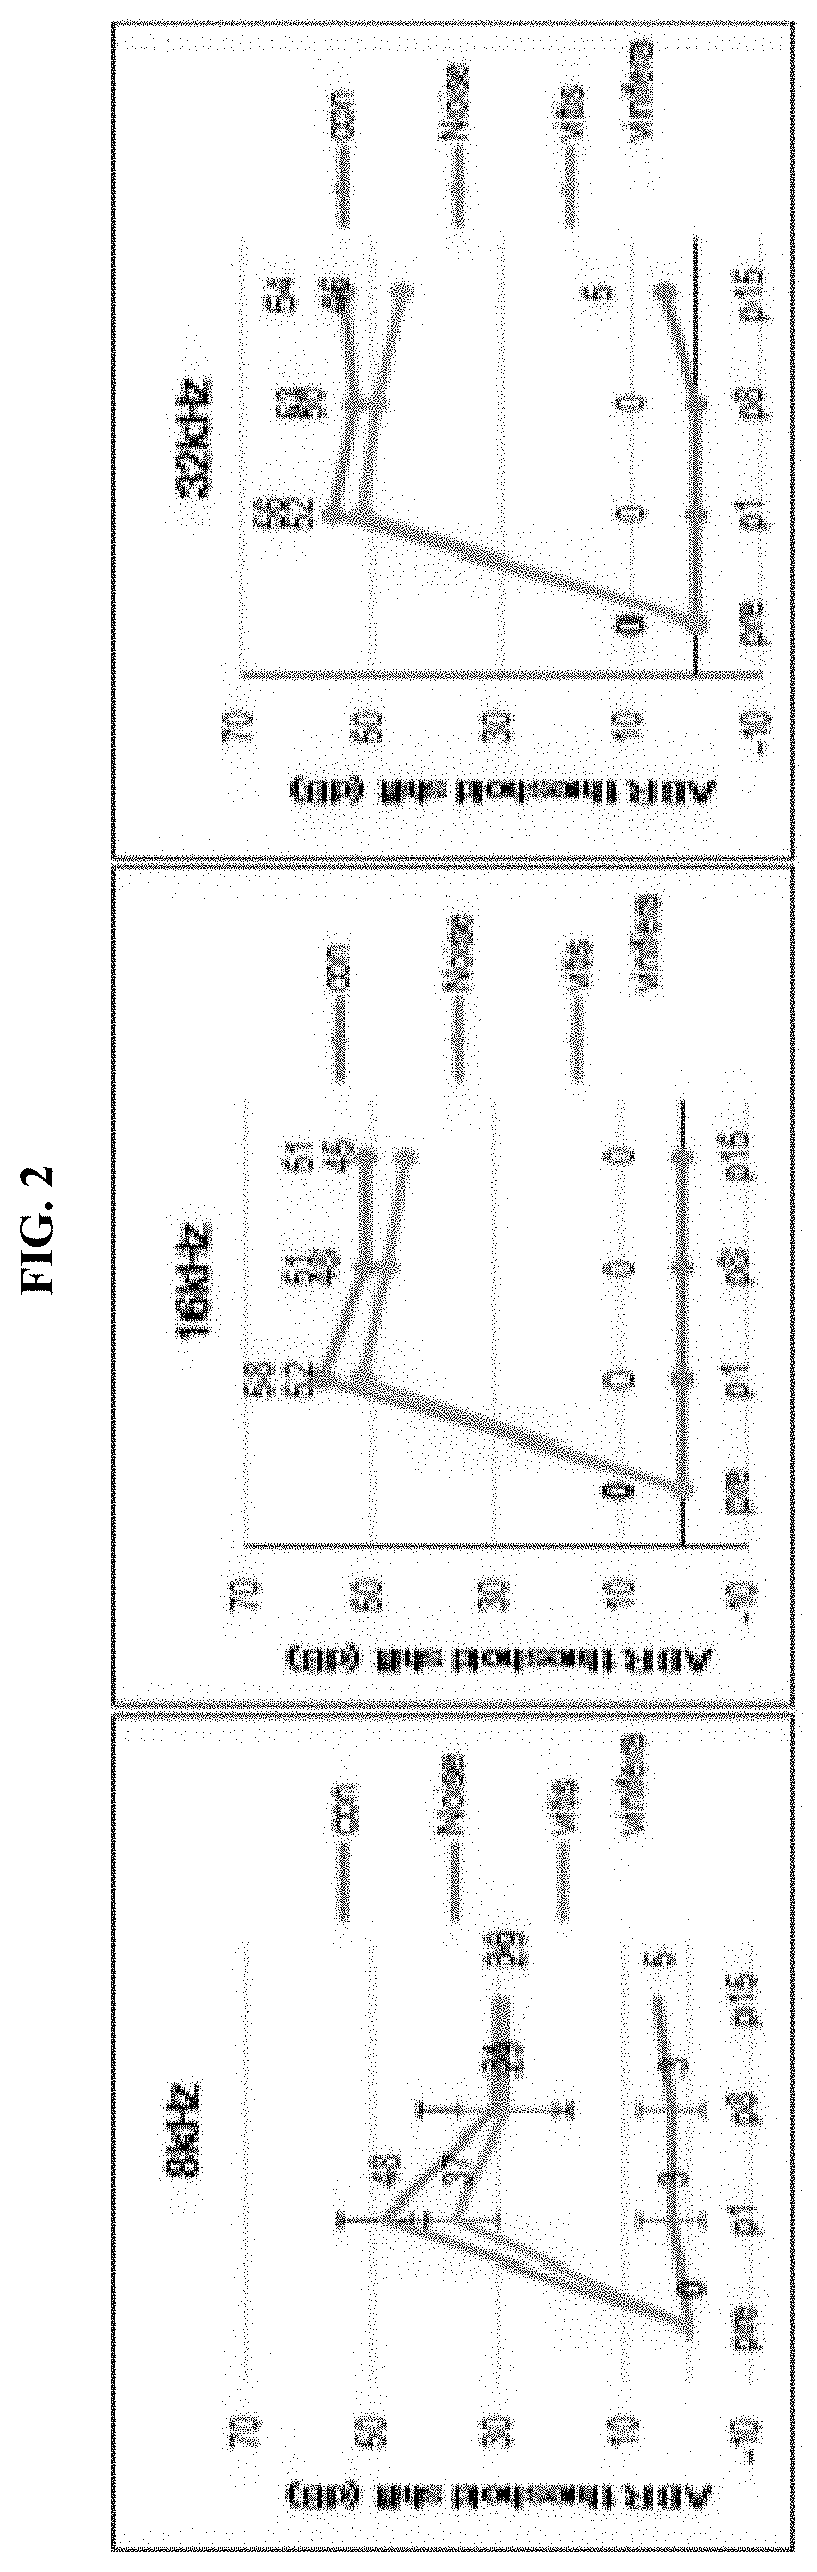 Composition for preventing or treating hearing loss, containing vitis vinifera leaf extract as active ingredient